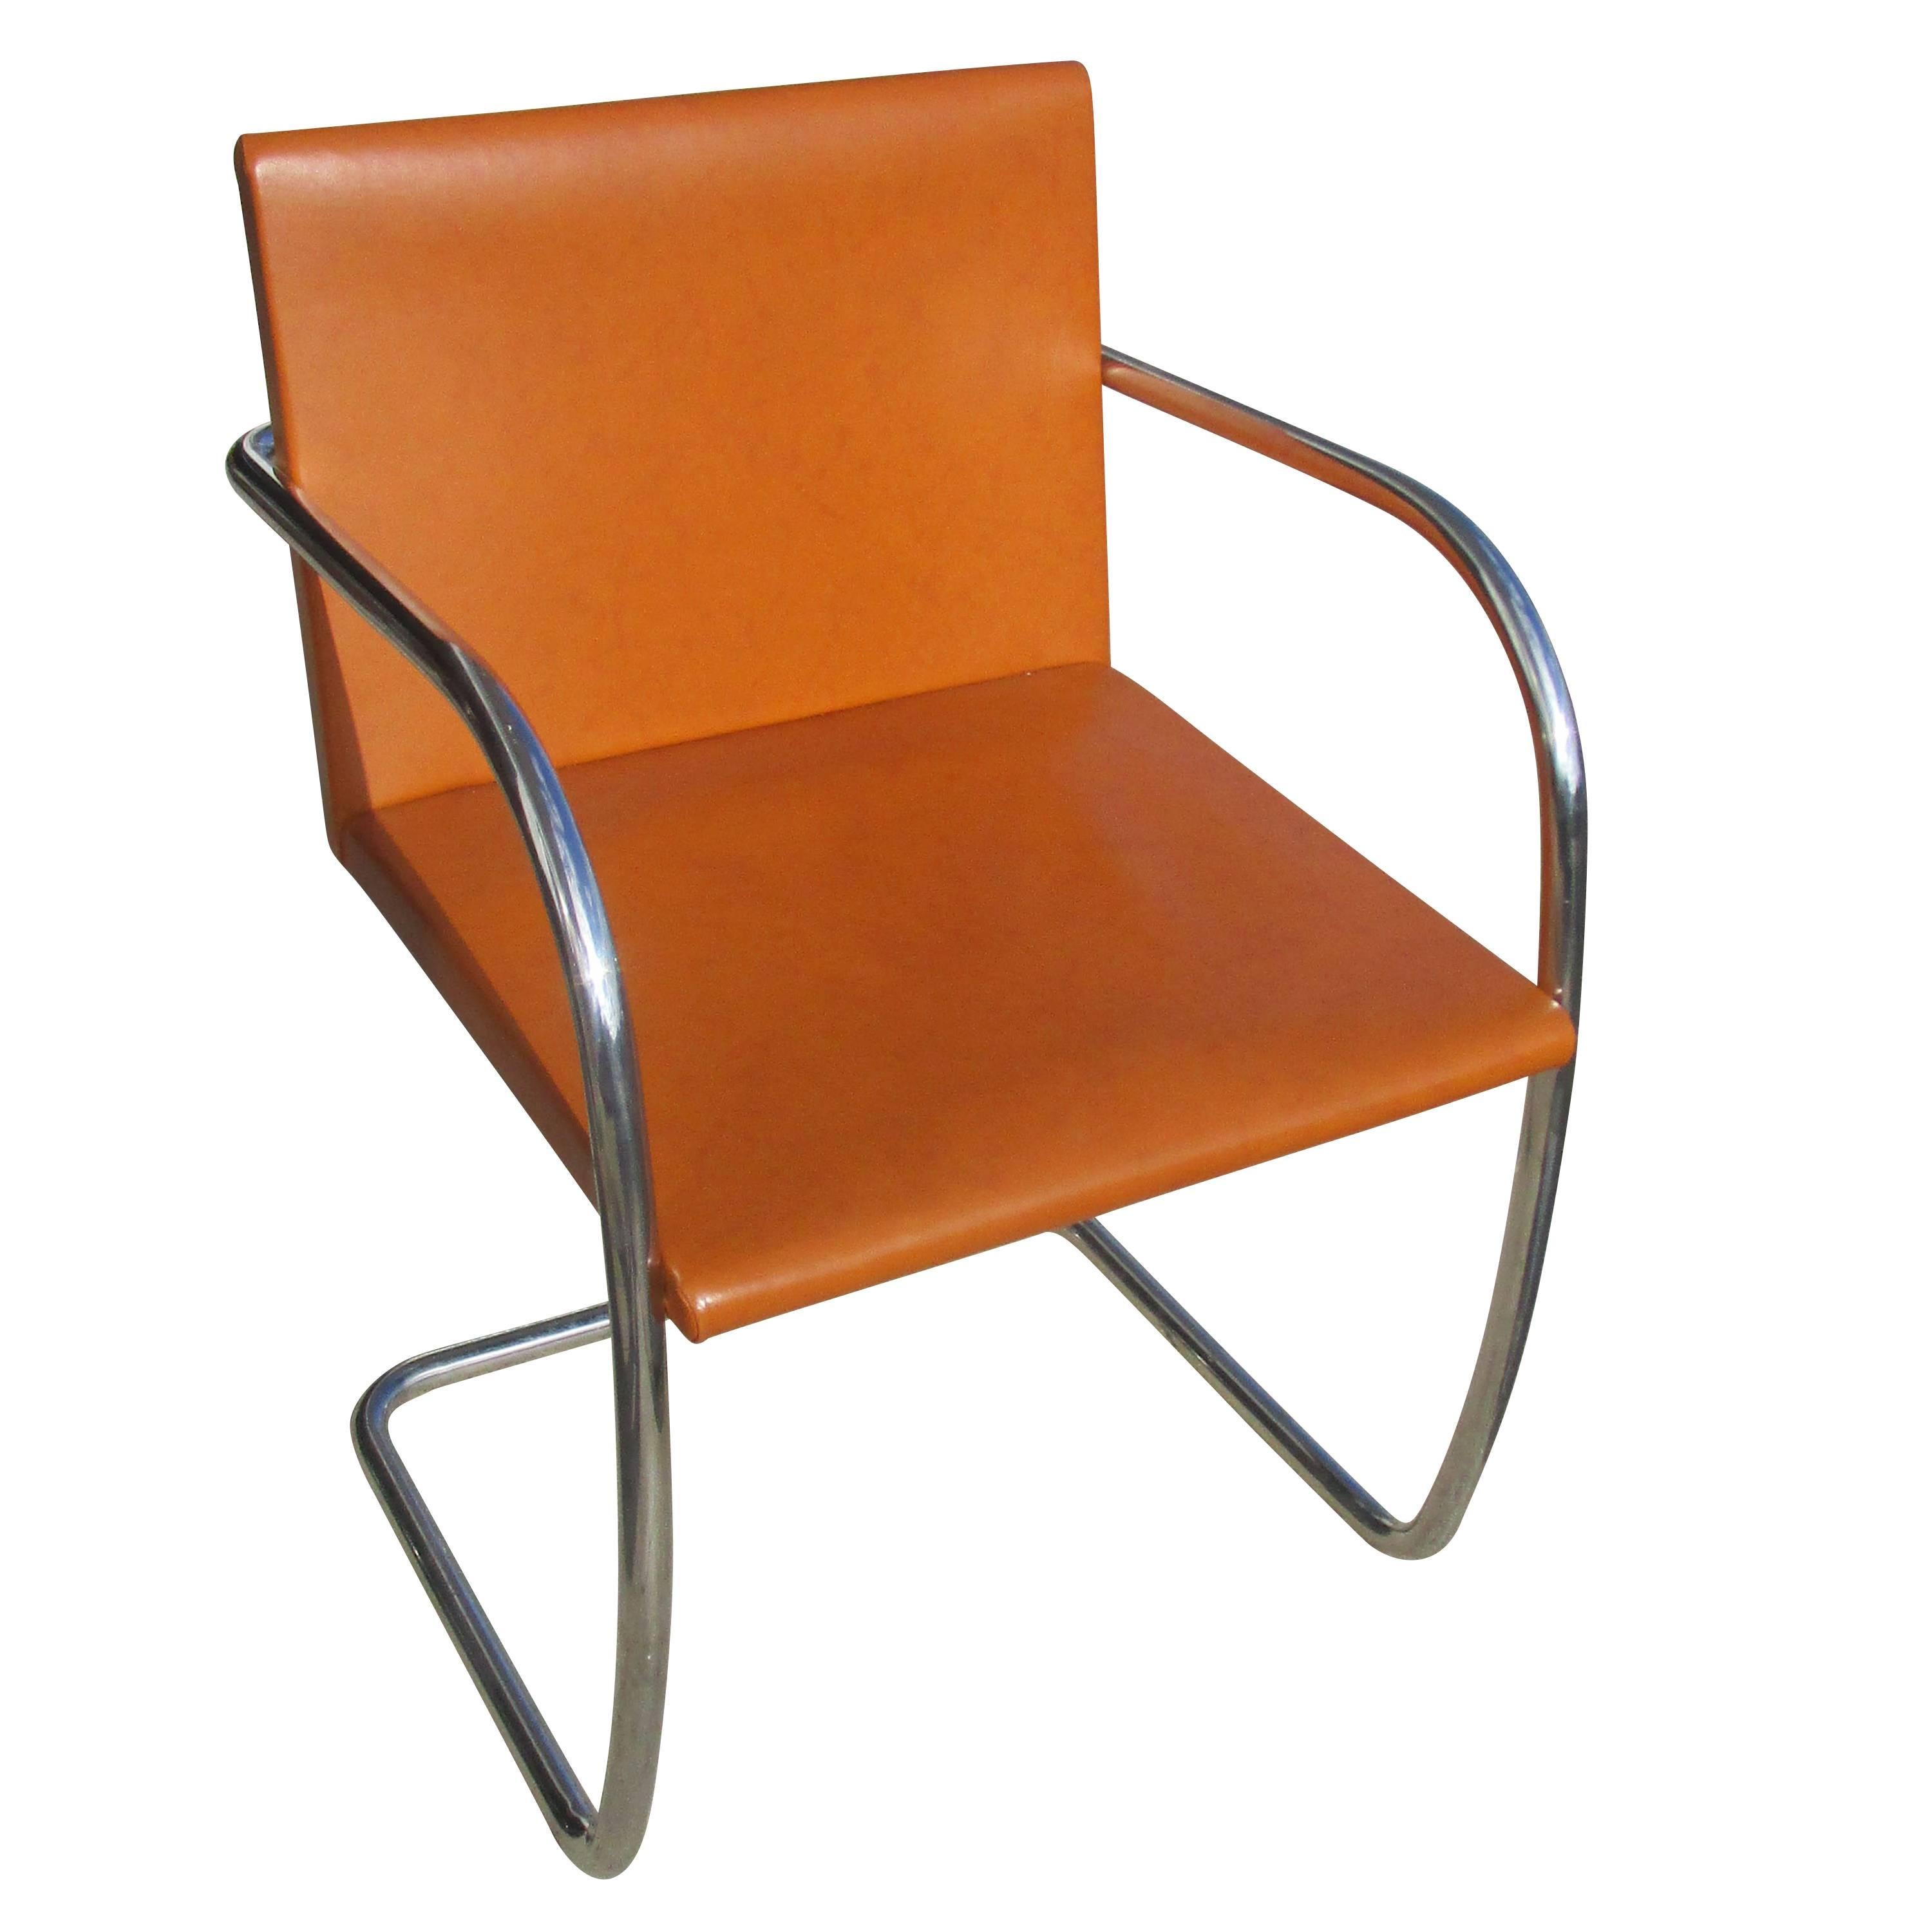 thin leather chair